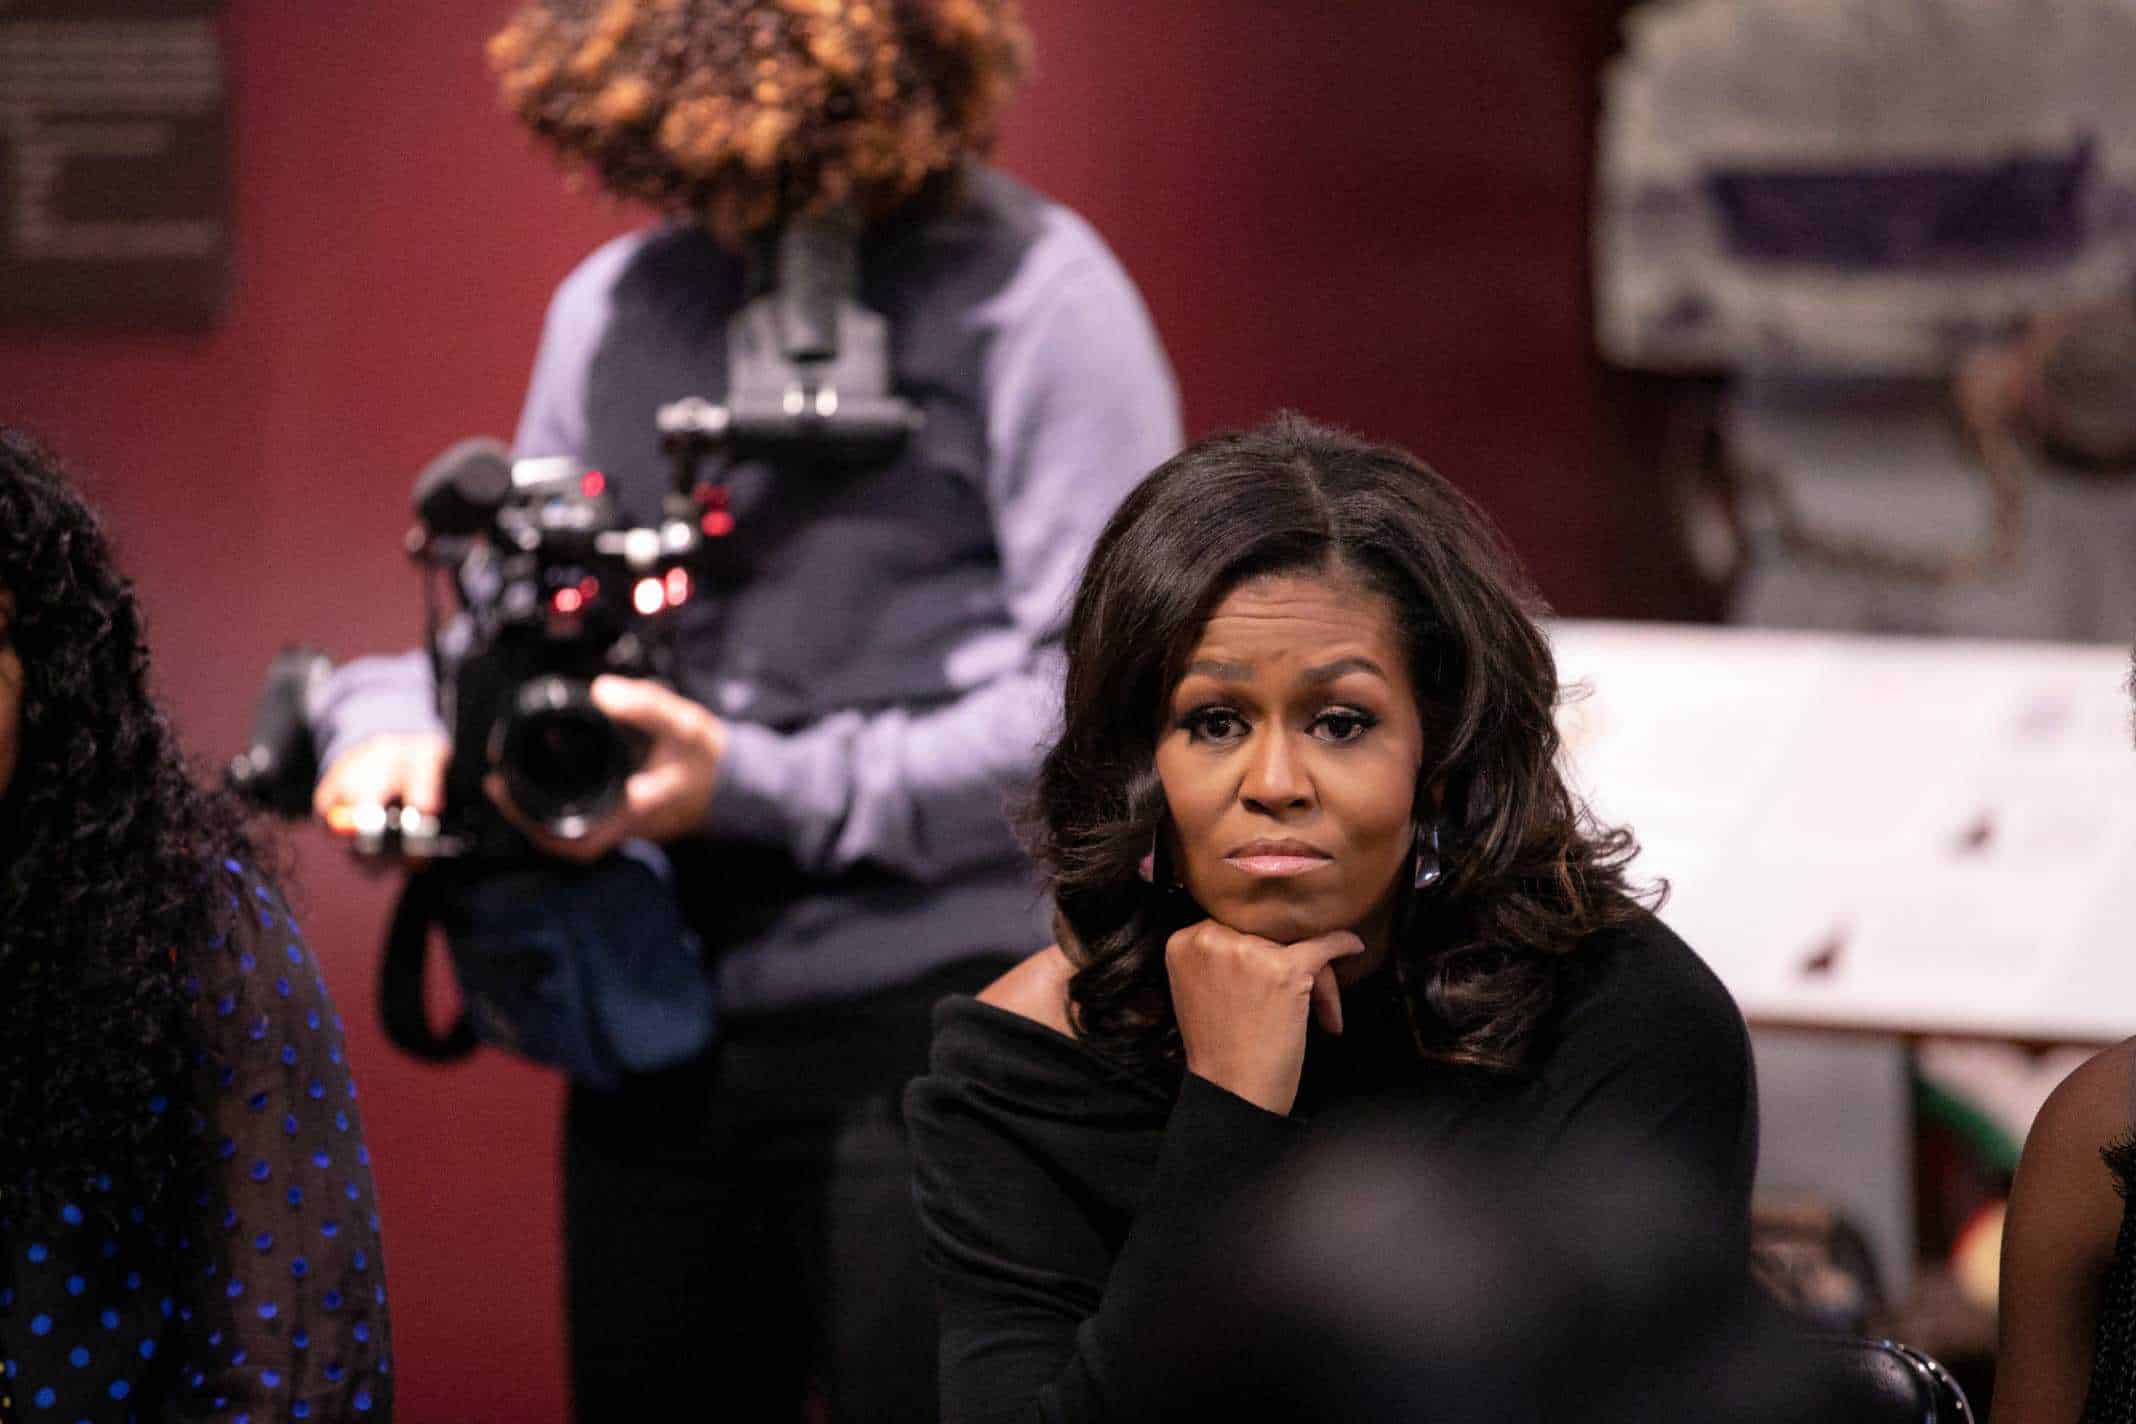 Michelle Obama listening with intent.